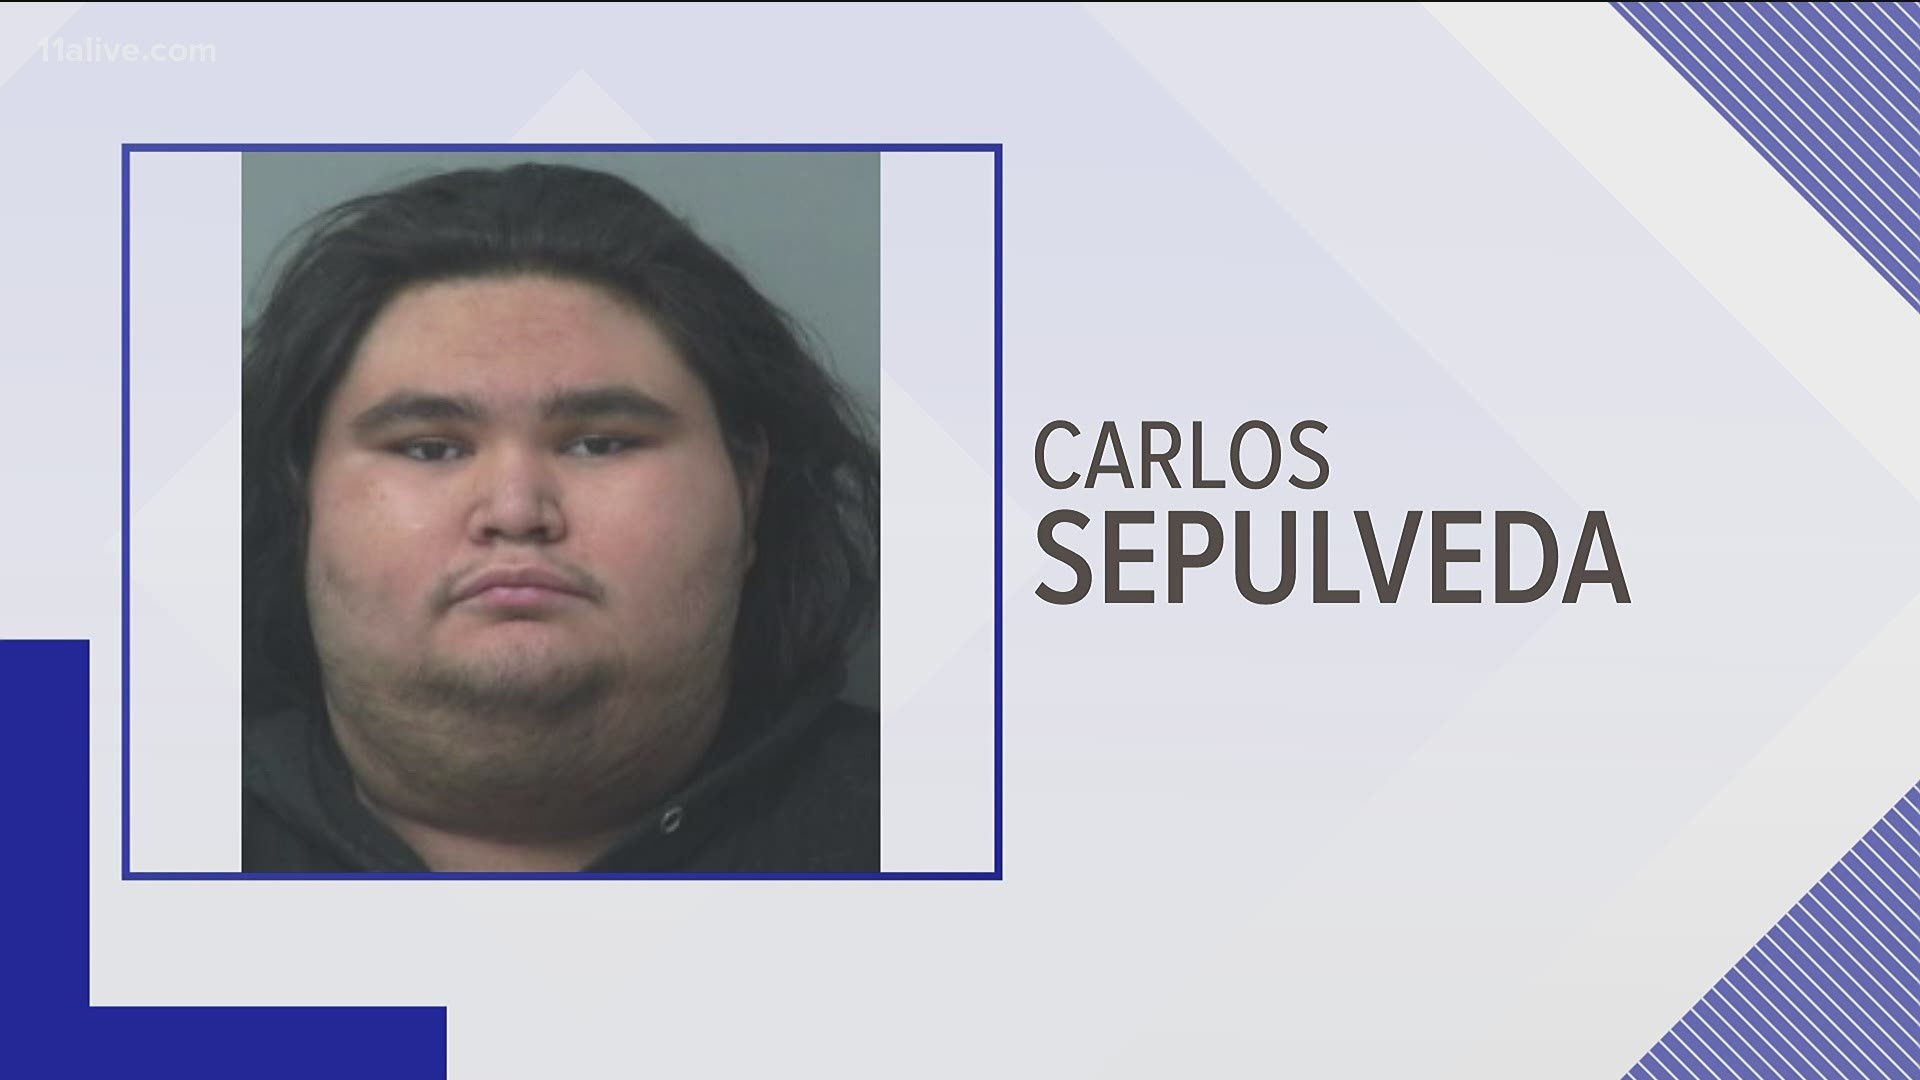 The homeowner, Carlos Sepulveda, was arrested on multiple charges related to the incident.